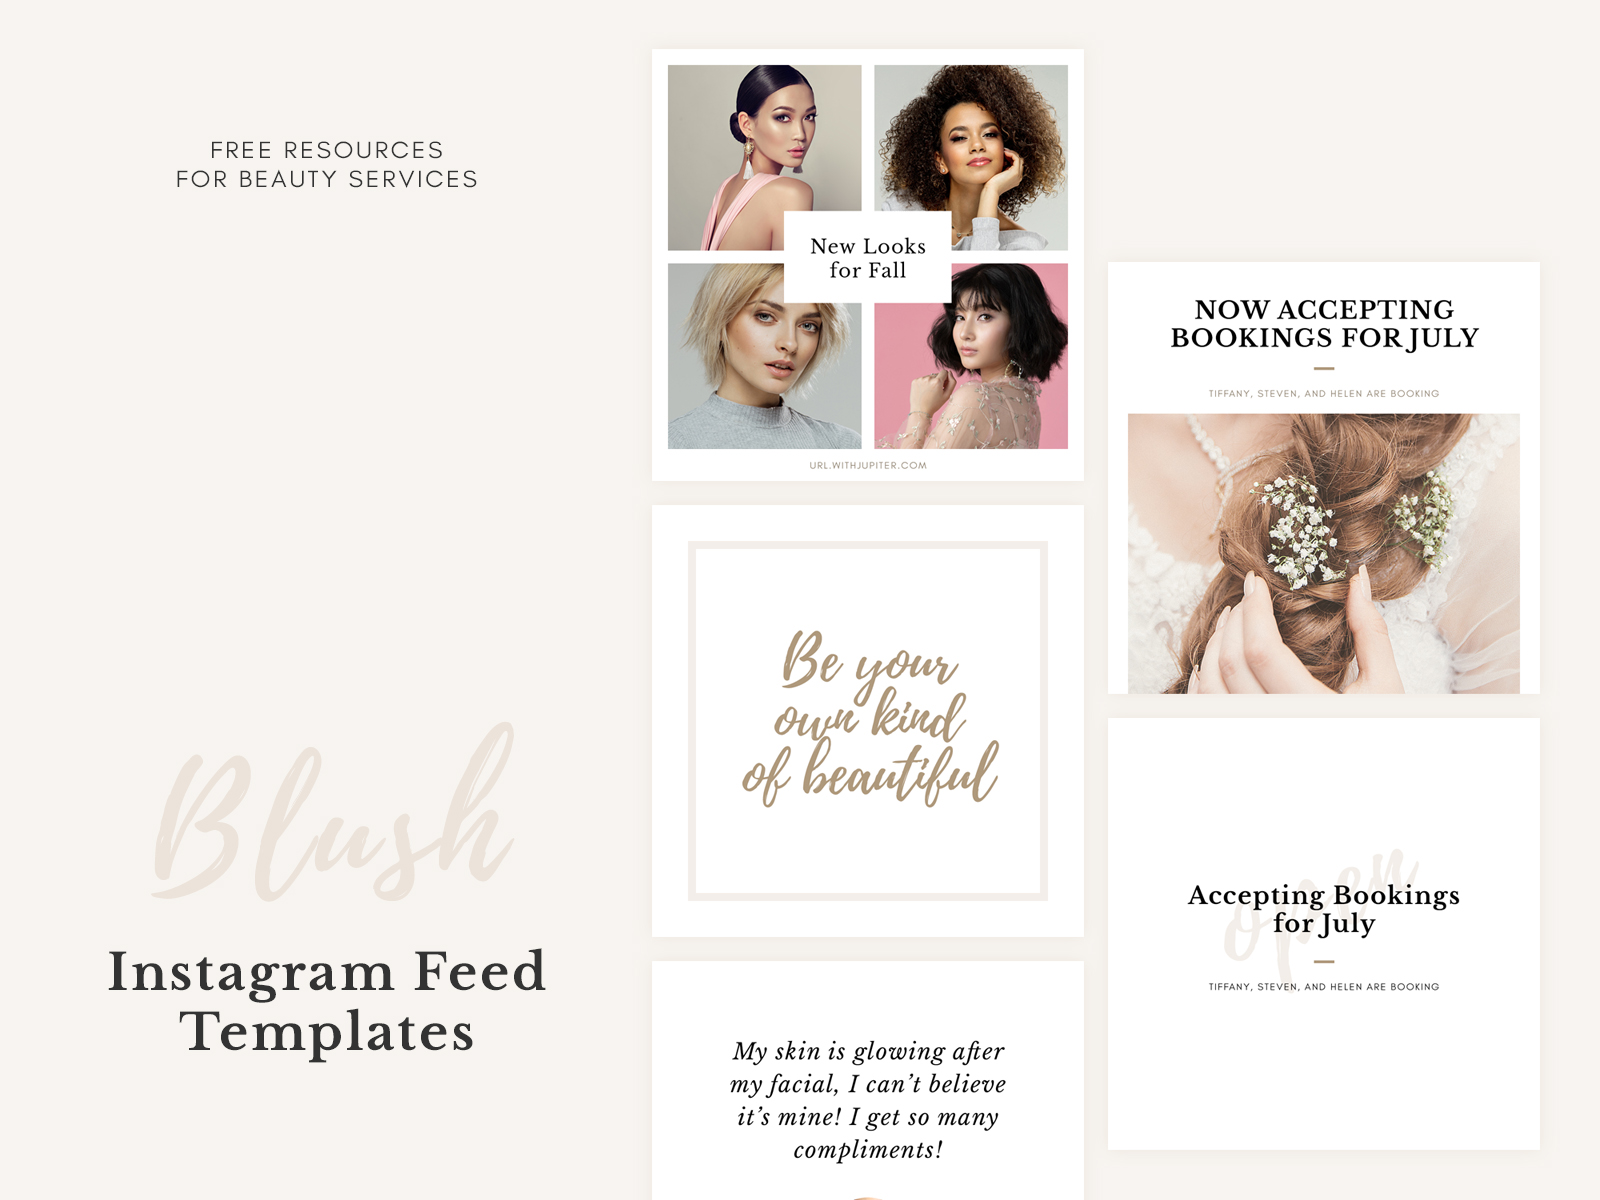 Blush–Instagram Feed Template Pack of 12